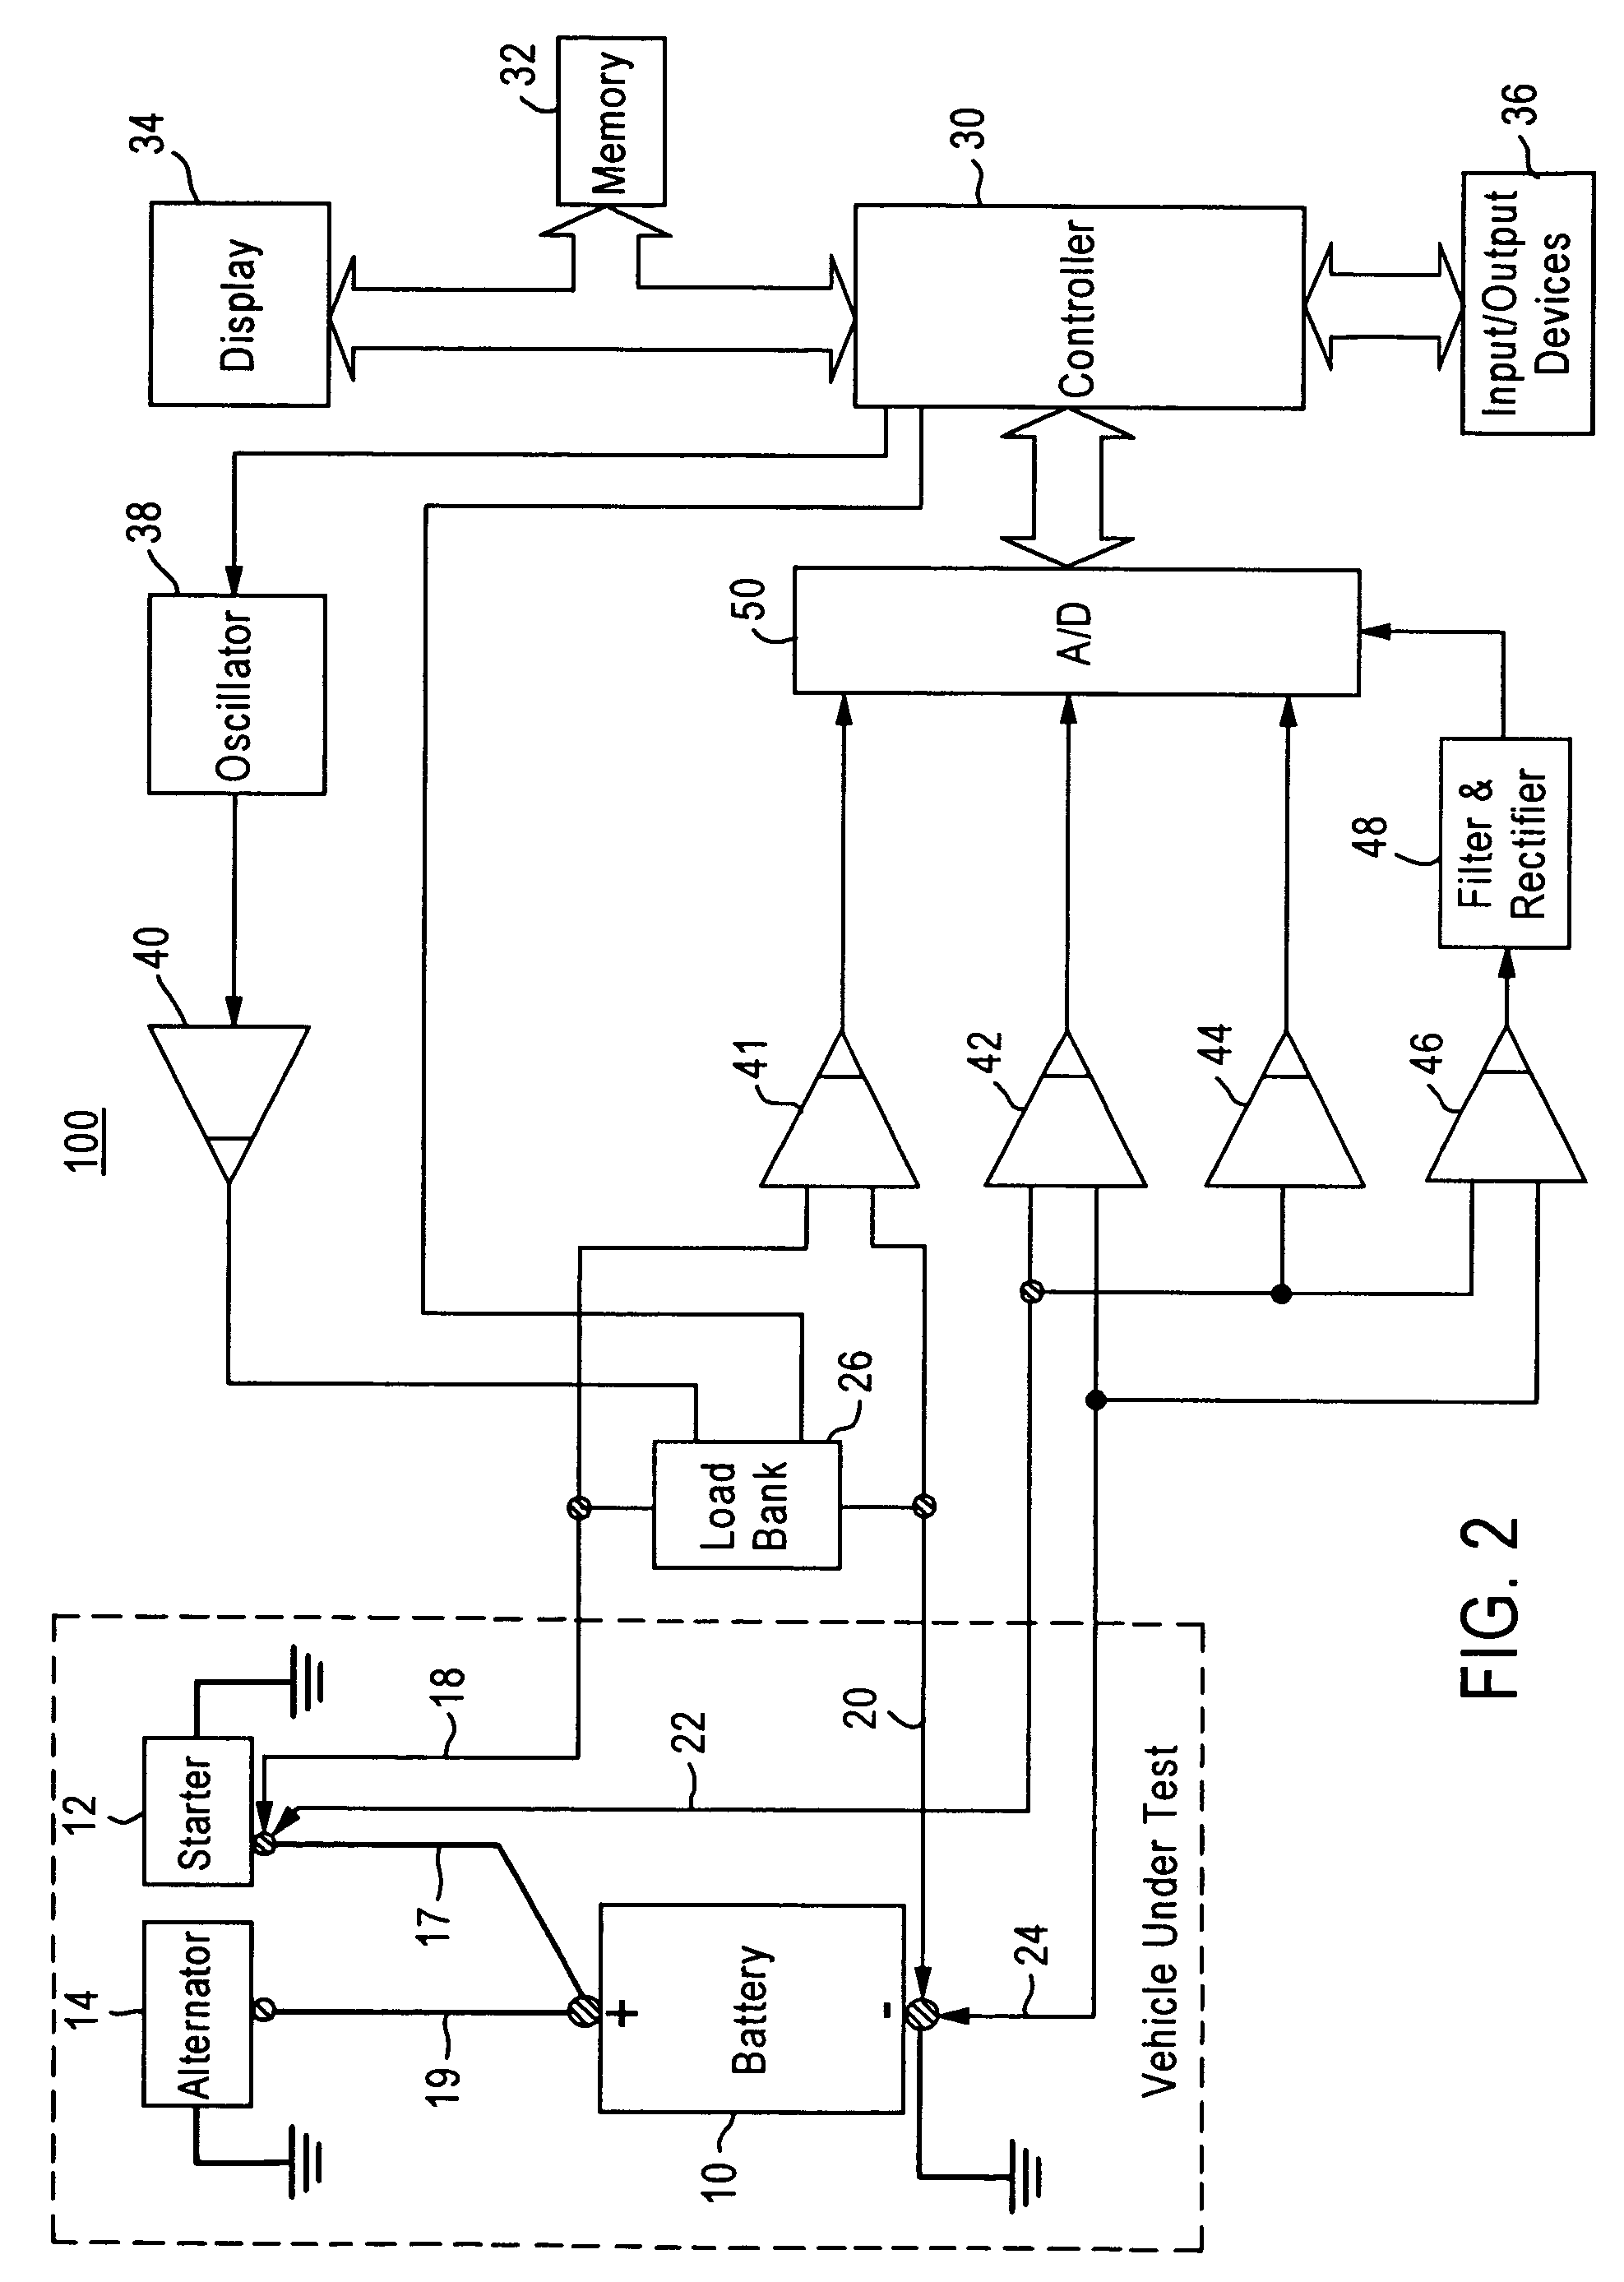 Active tester for vehicle circuit evaluation